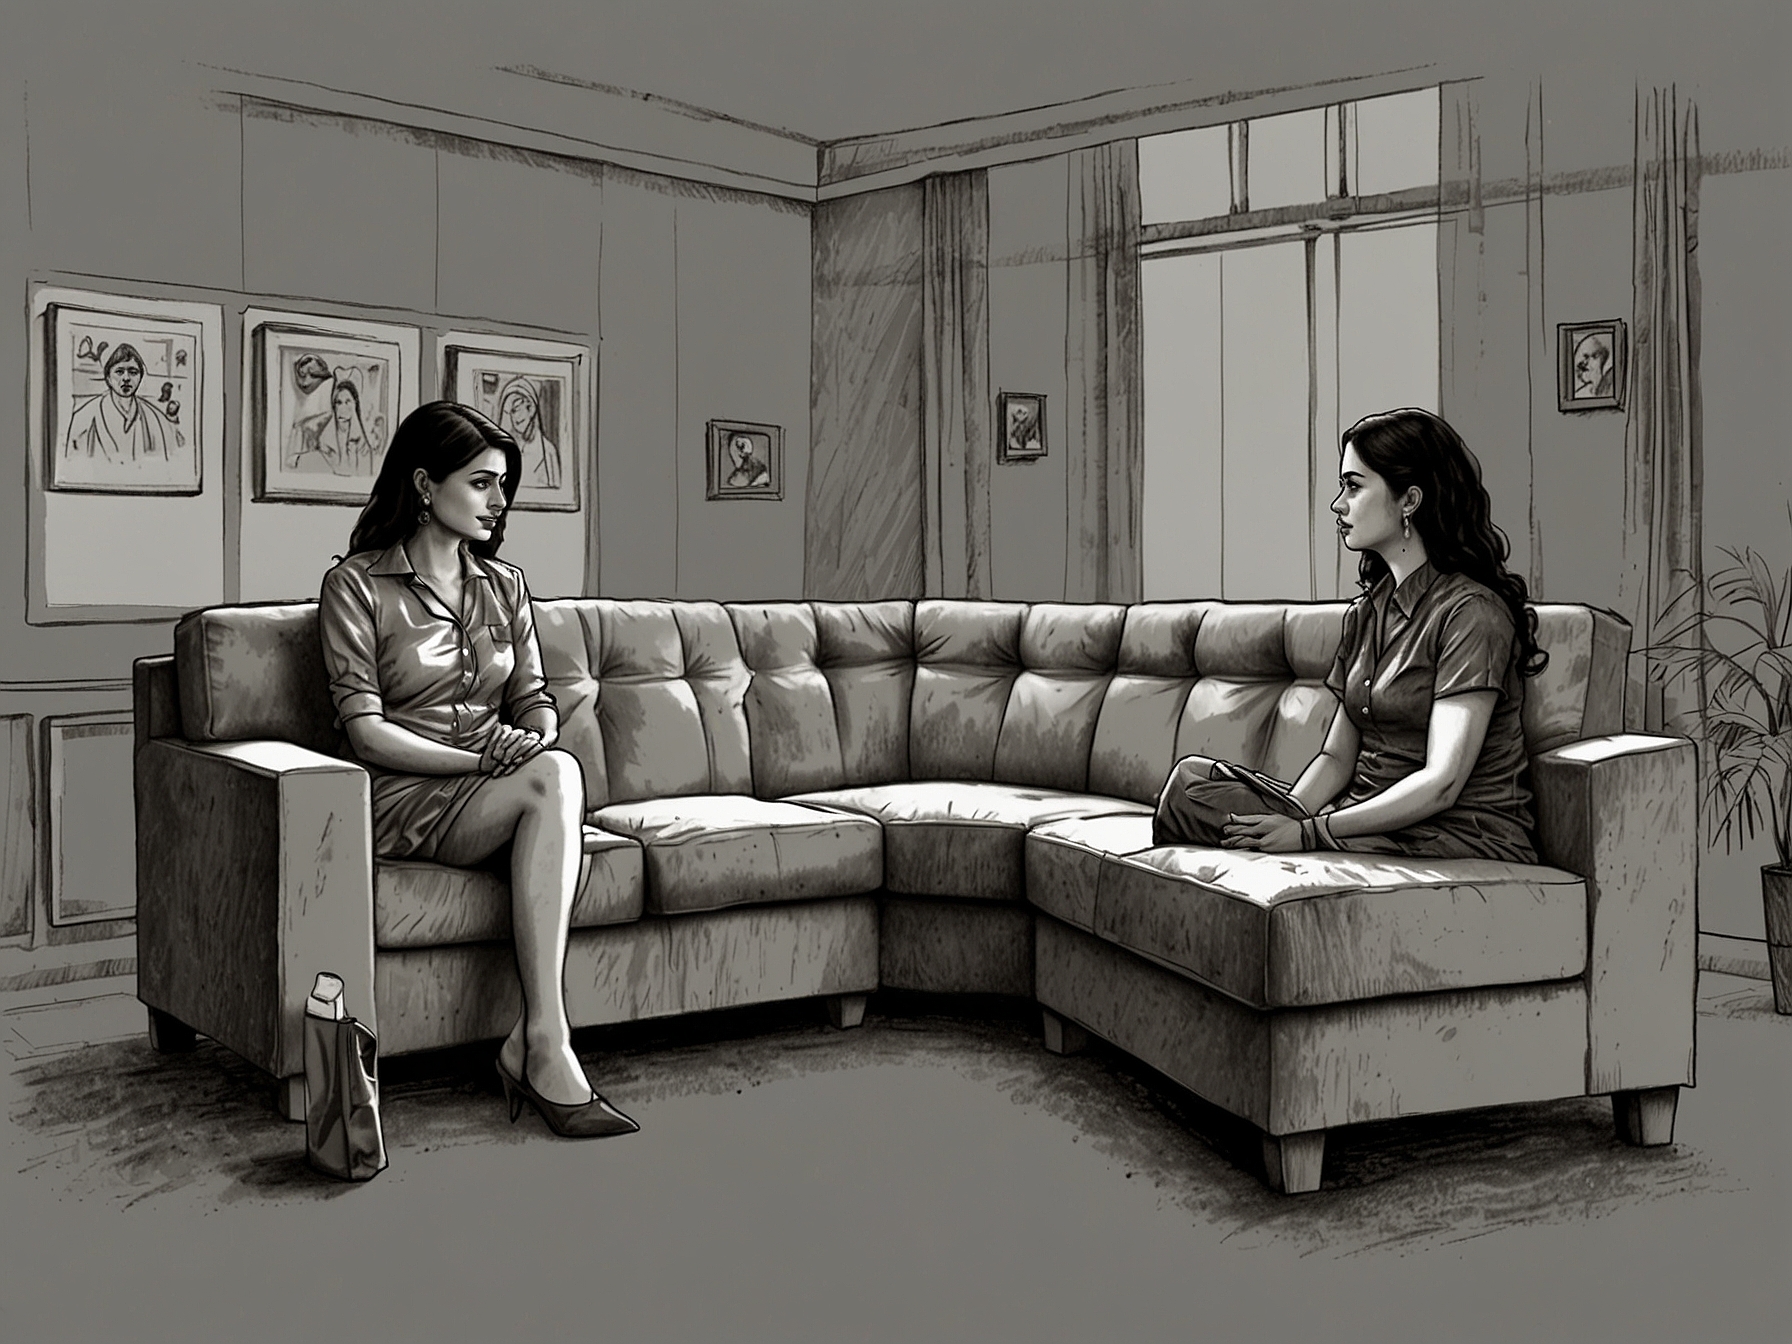 A symbolic depiction of the casting couch issue in Bollywood, illustrating the power dynamics and exploitation faced by aspiring actresses in the film industry.